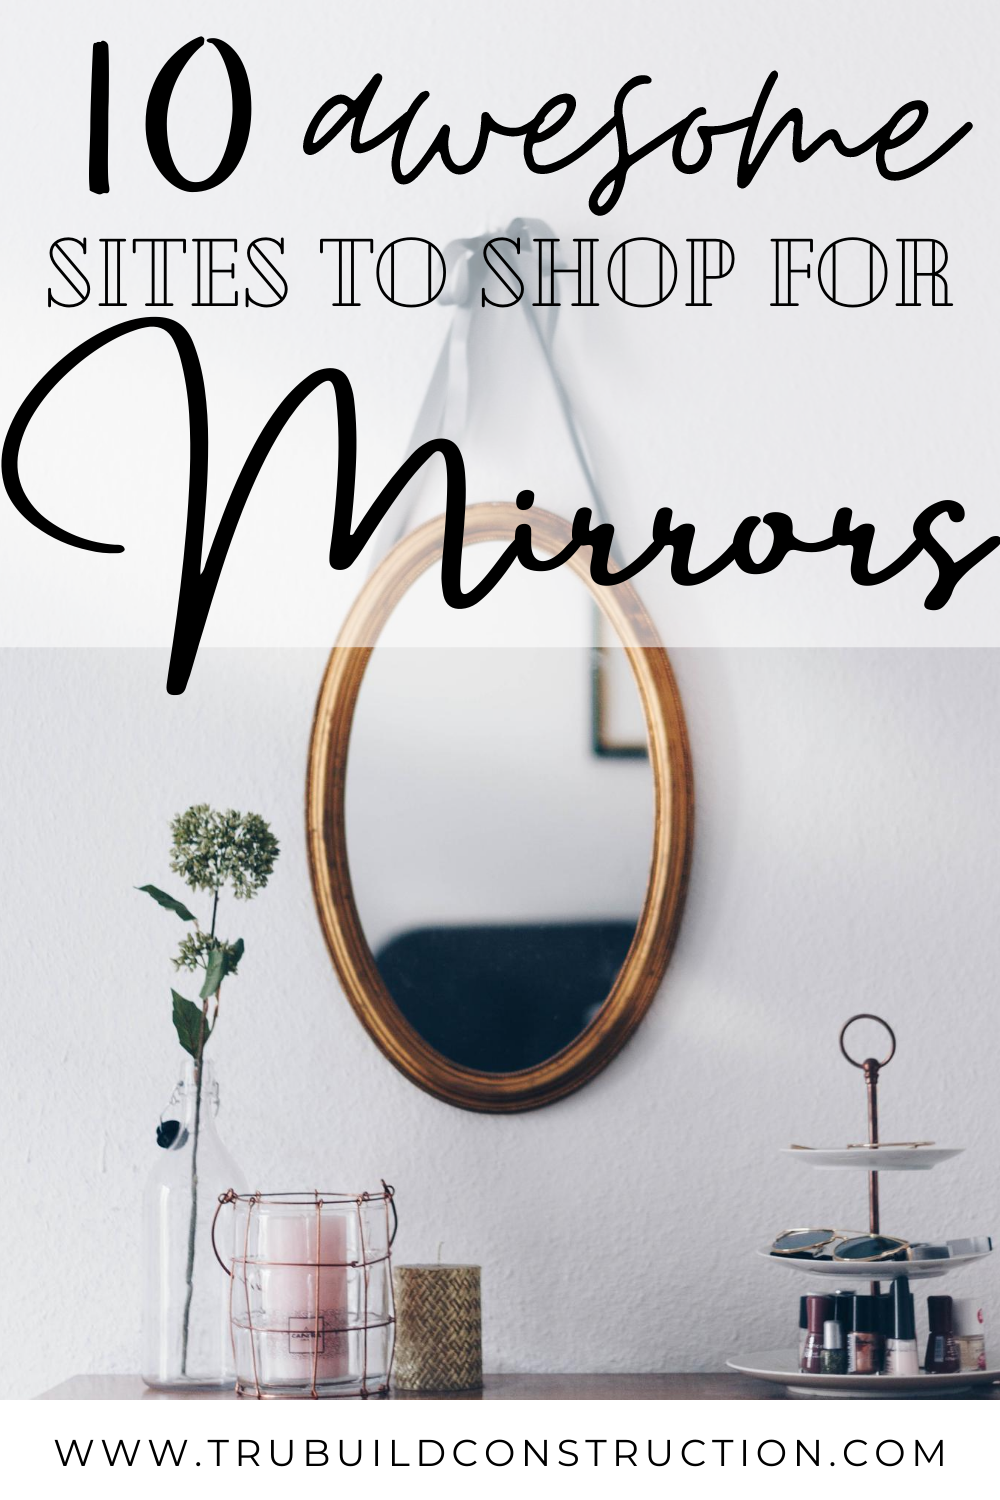 10 Of The Best Websites To Find Mirrors, Bathroom Mirrors Home Goods